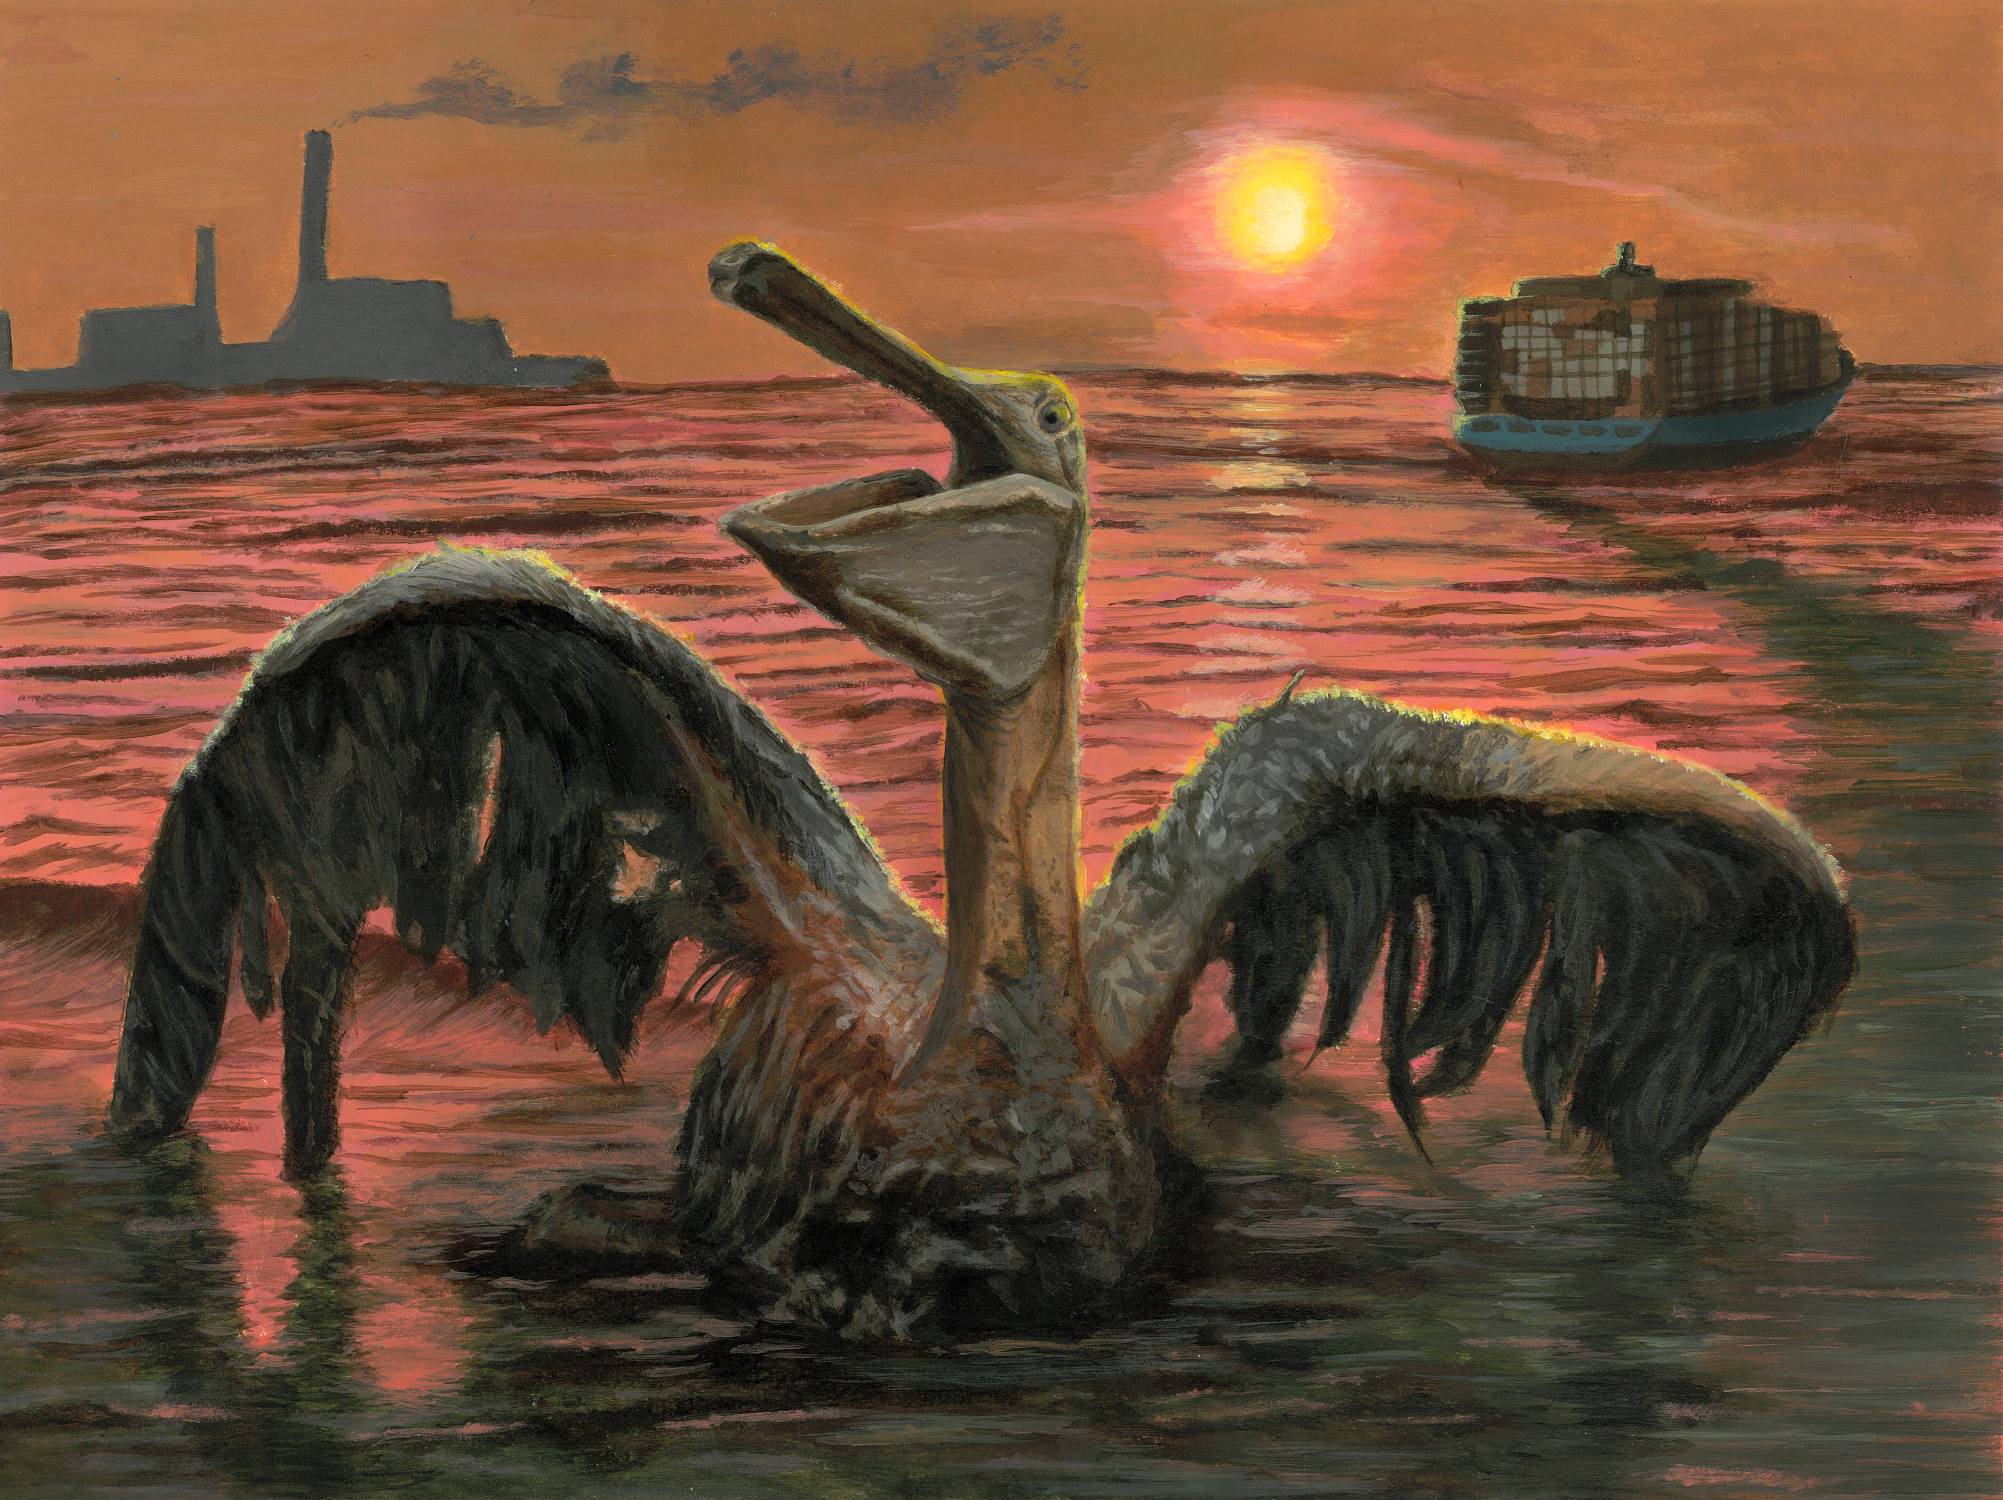 A pelican in foreground stretches out its wings and opens its beak. It is dripping with oil. The sun sets and in the distance a full cargo ship departs and a factory smokestack emits dark smoke.